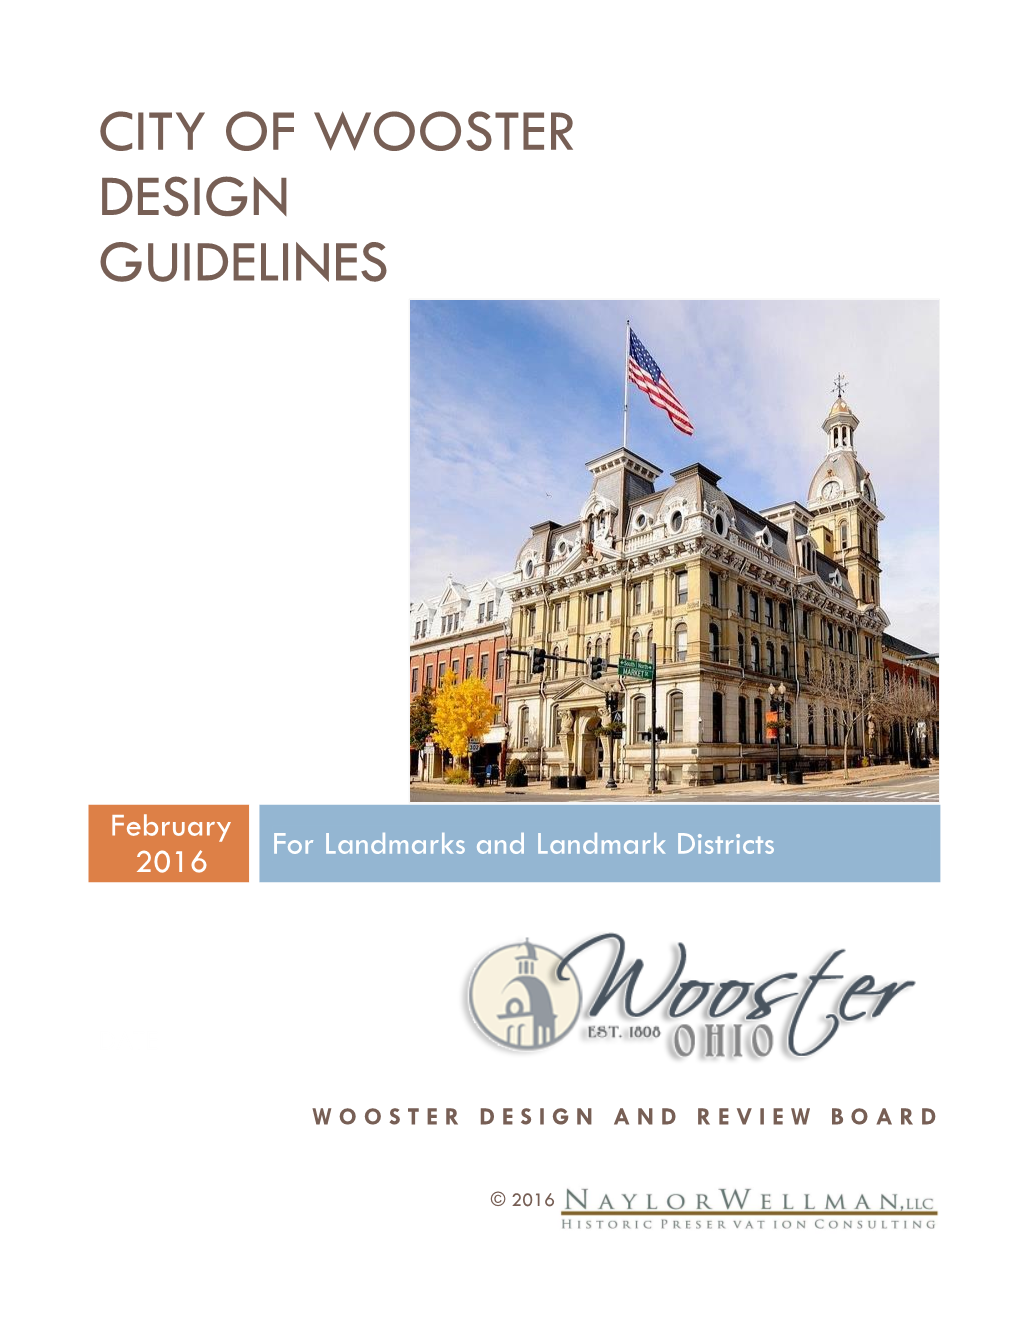 City of Wooster Design Guidelines